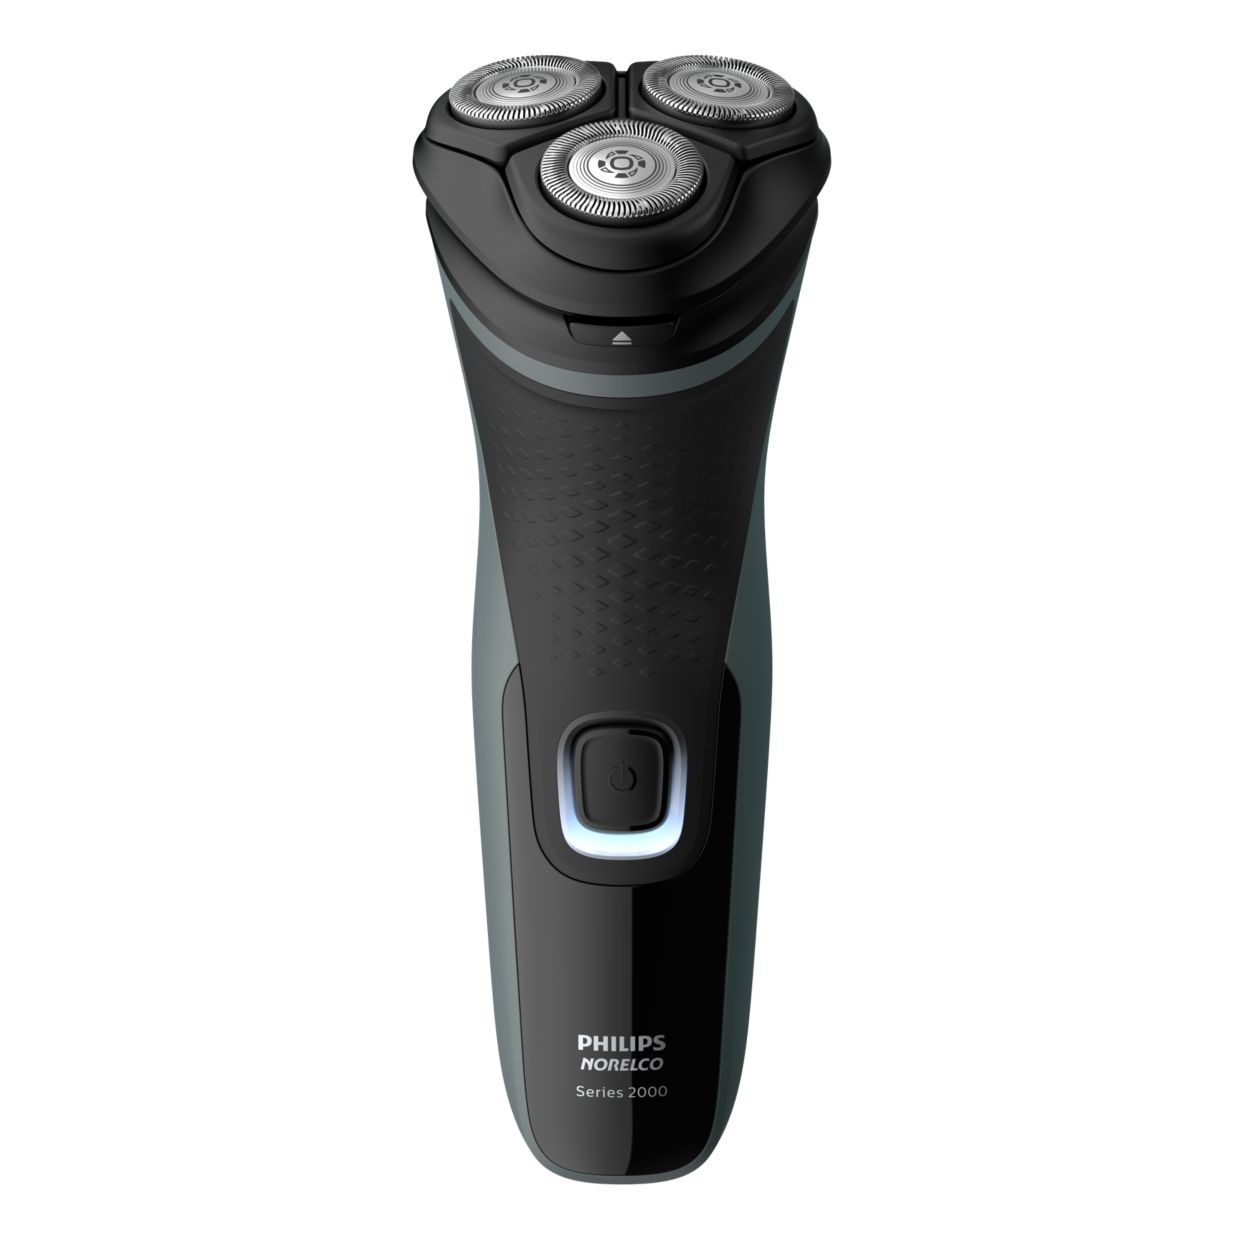 Articulatie groei druiven Shaver 2300 Dry electric shaver, Series 2000 S1211/81 | Norelco